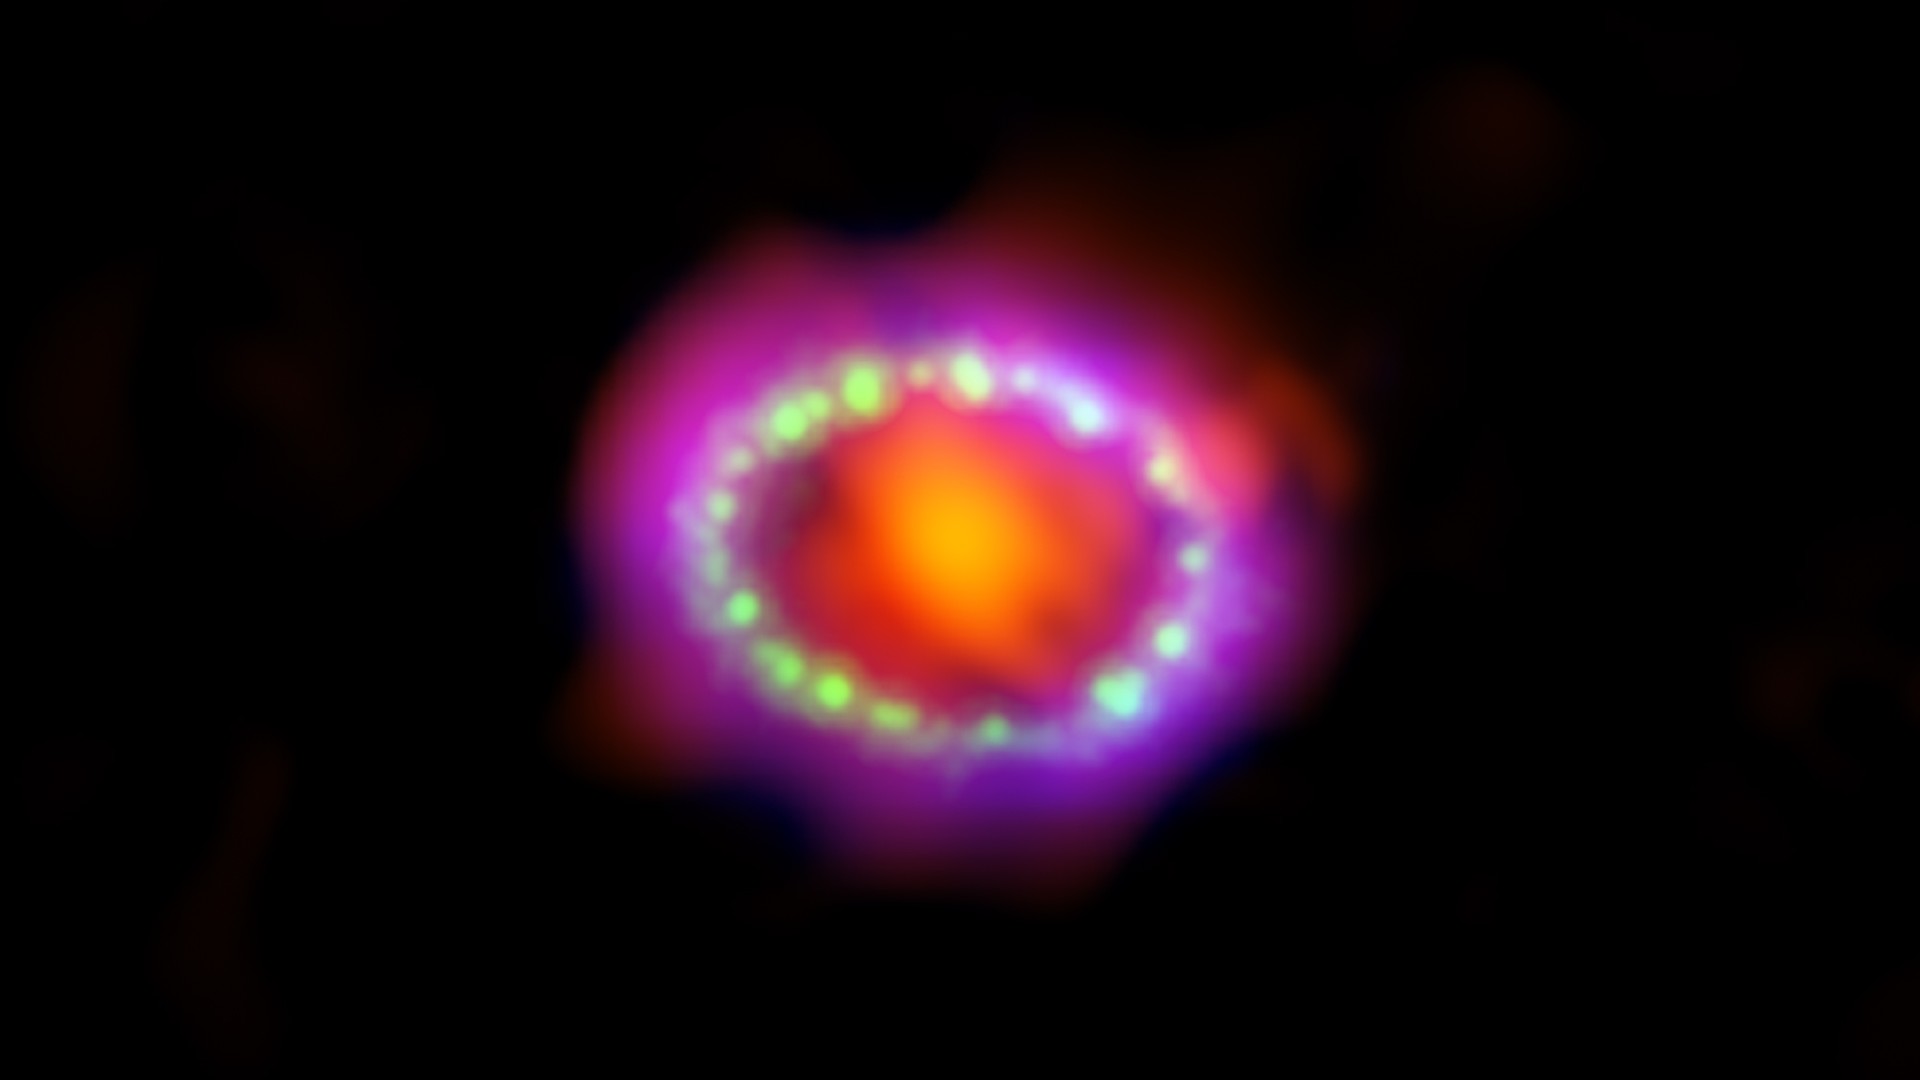 Image of SN 1987A, the brightest supernova in more than 400 years. Here we see an orange-red circular center surrounded by white dots, then a purple and red ring.